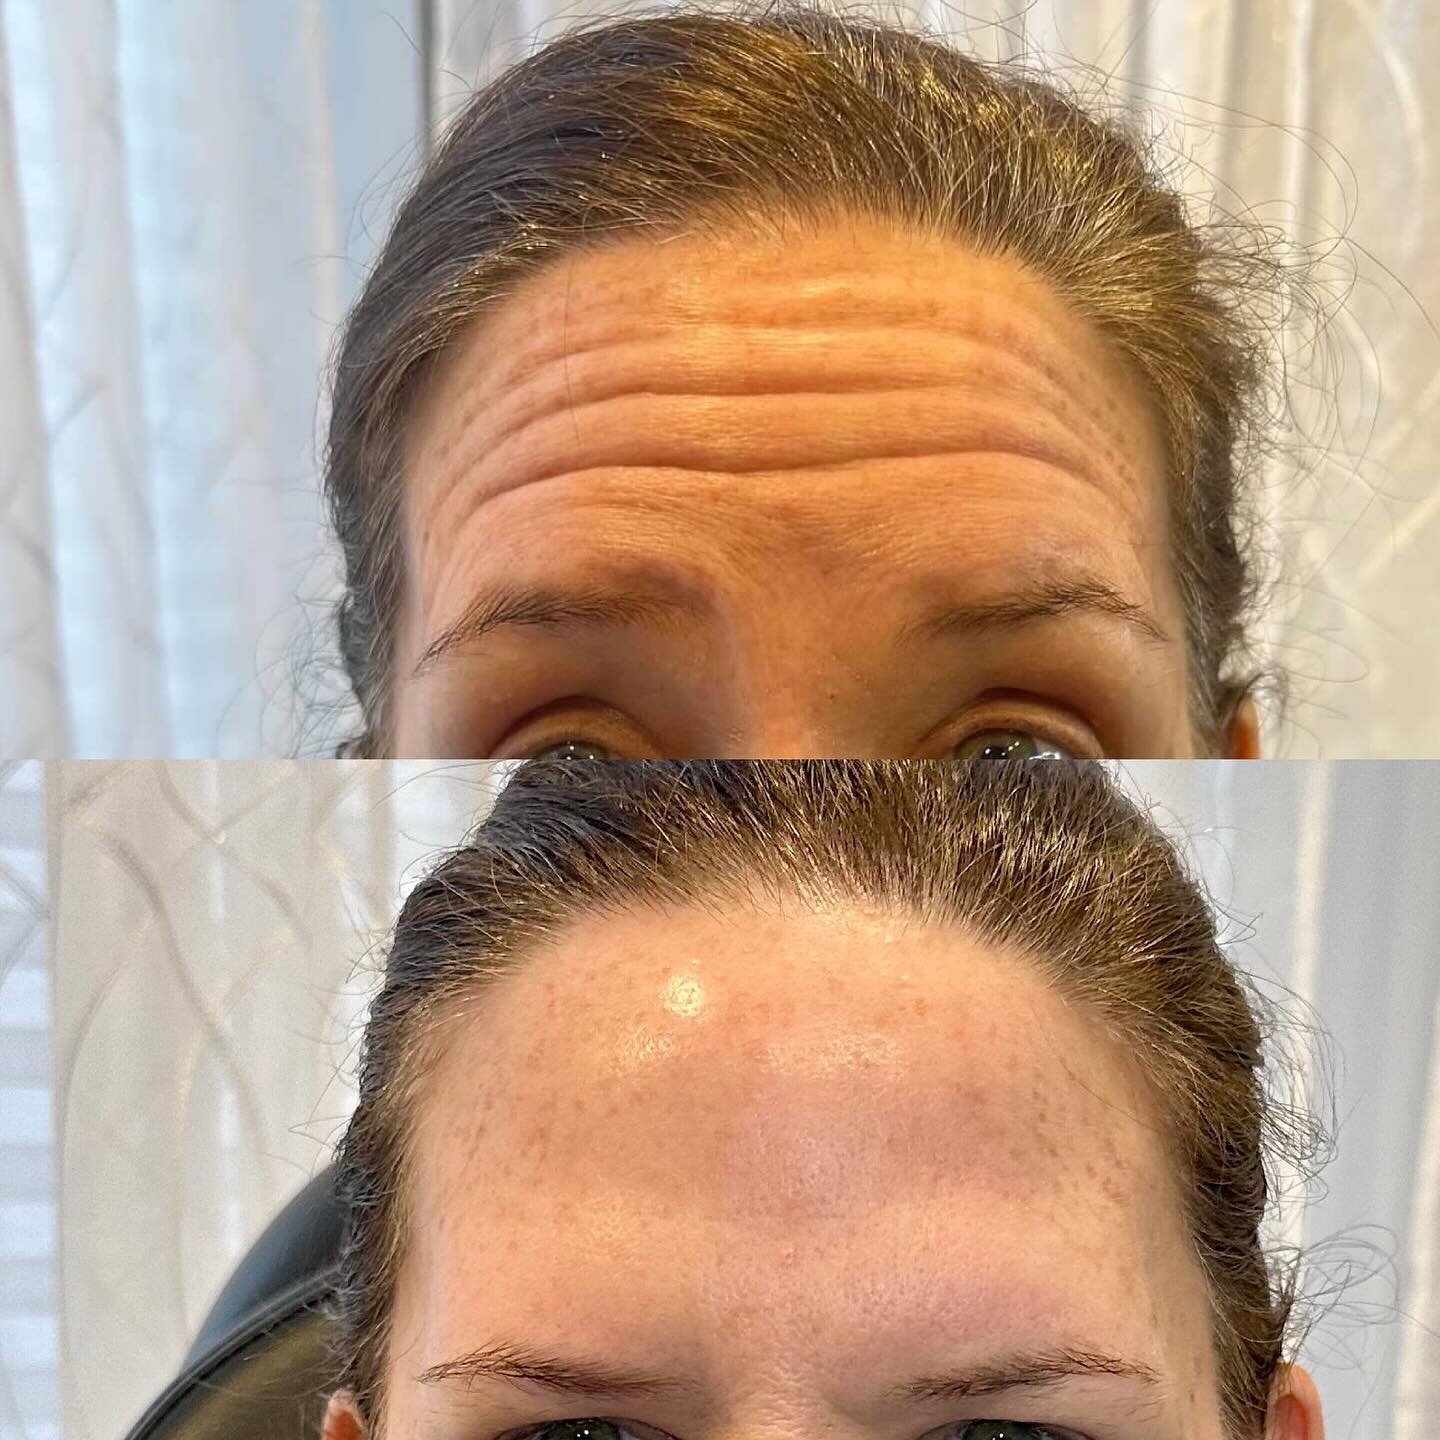 Celebrate your own birthday: This lady spent her 50th with me!

We treated her forehead and 11&rsquo;s and she has a younger more refreshed appearance. 

Come in on your birthday and get $50 off.
Sign up for Aspire, Evolus or Alle rewards and save ev